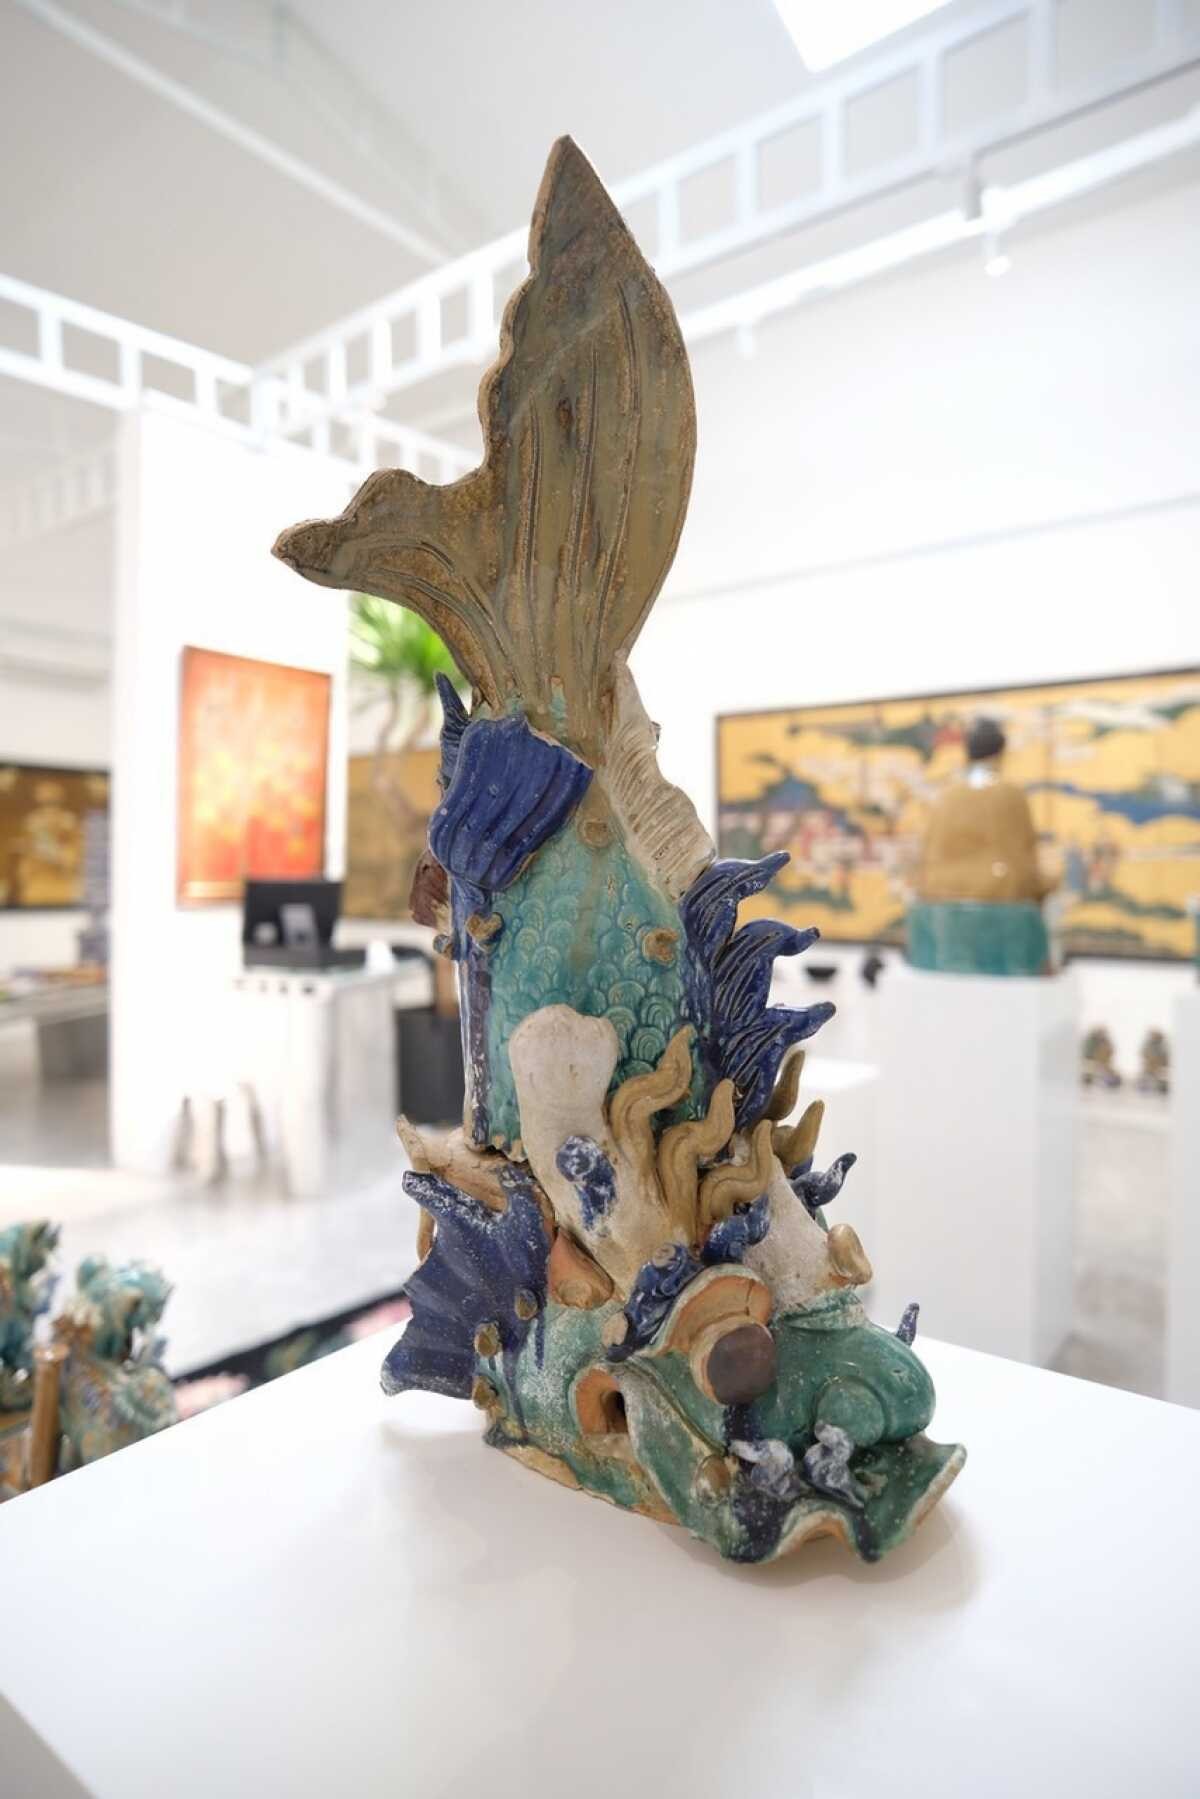 “Mysterious Asia” - Painting And Ceramic Exhibition Opens In Ho Chi Minh City